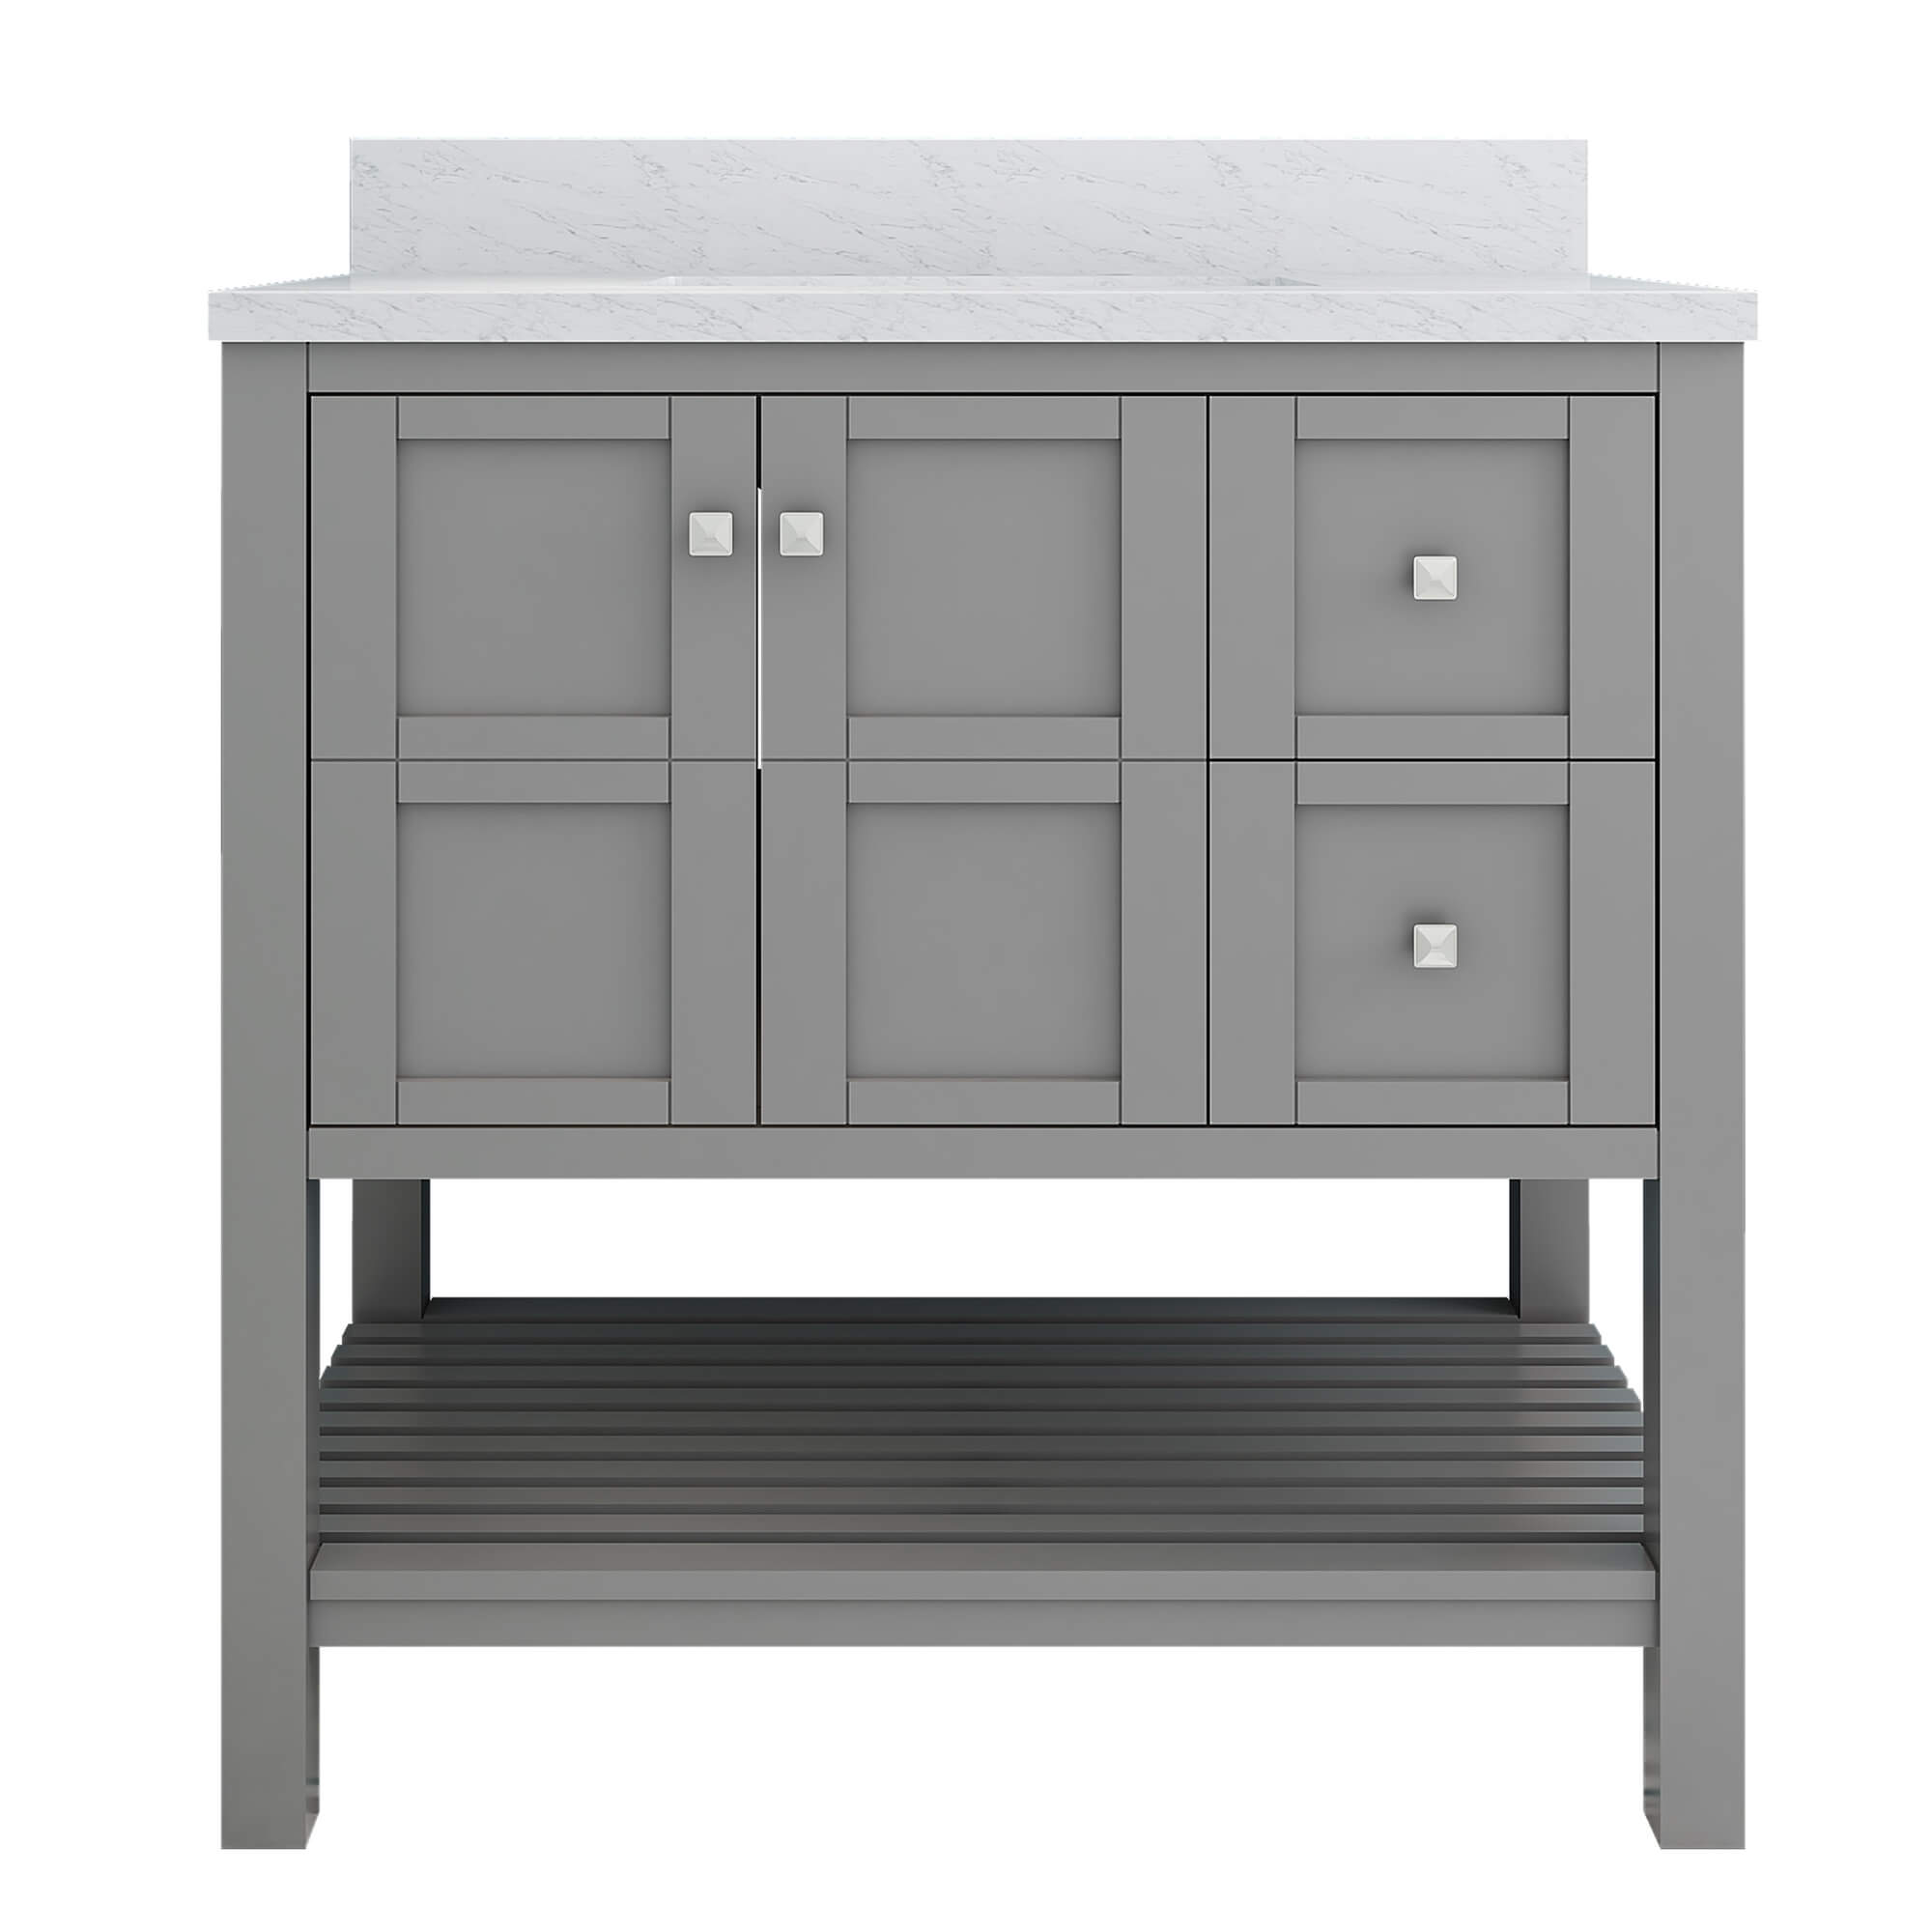 CASAINC 36 x 22 x 35.4 in. Solid Wood Bath Vanity with Carrara White Marble Top and Shelf in Gray/White (No/With Mirror)